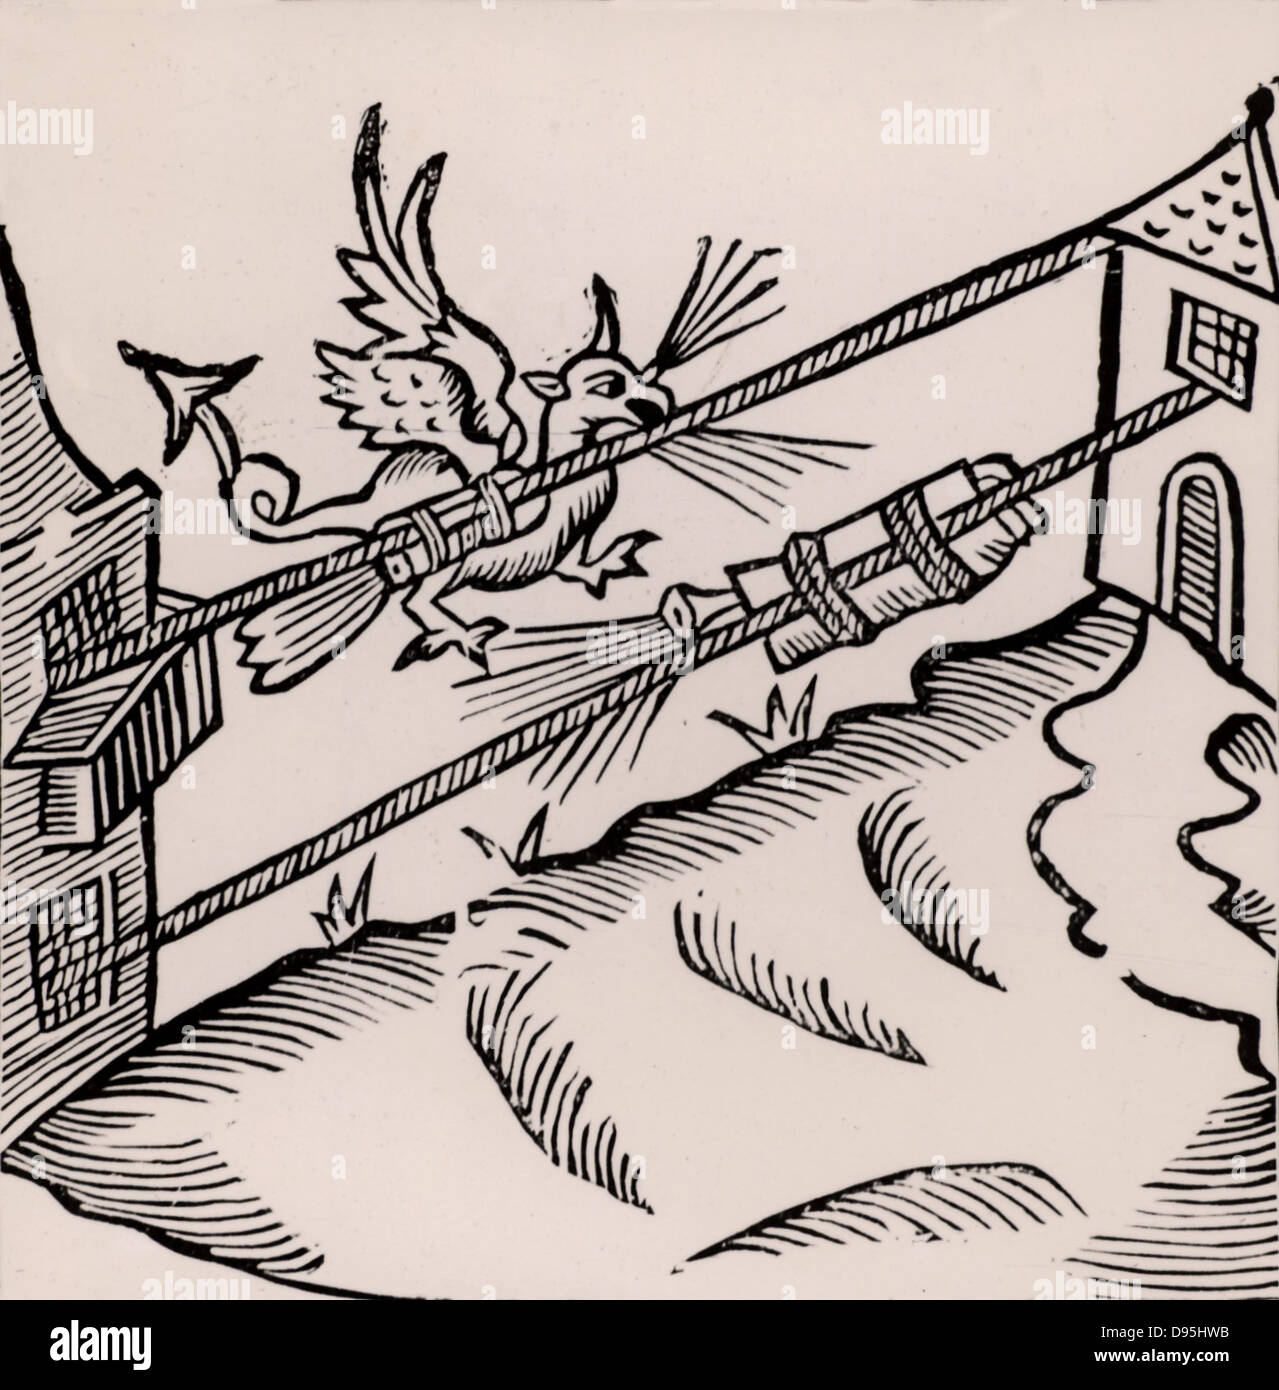 A Firework display: The figure of a dragon breathing fire is attached to a rocket tied to a rope stretched between two buildings.   Woodcut from 'Recreations mathematiques' by Jean Leurechon (Rouen, 1628). Stock Photo